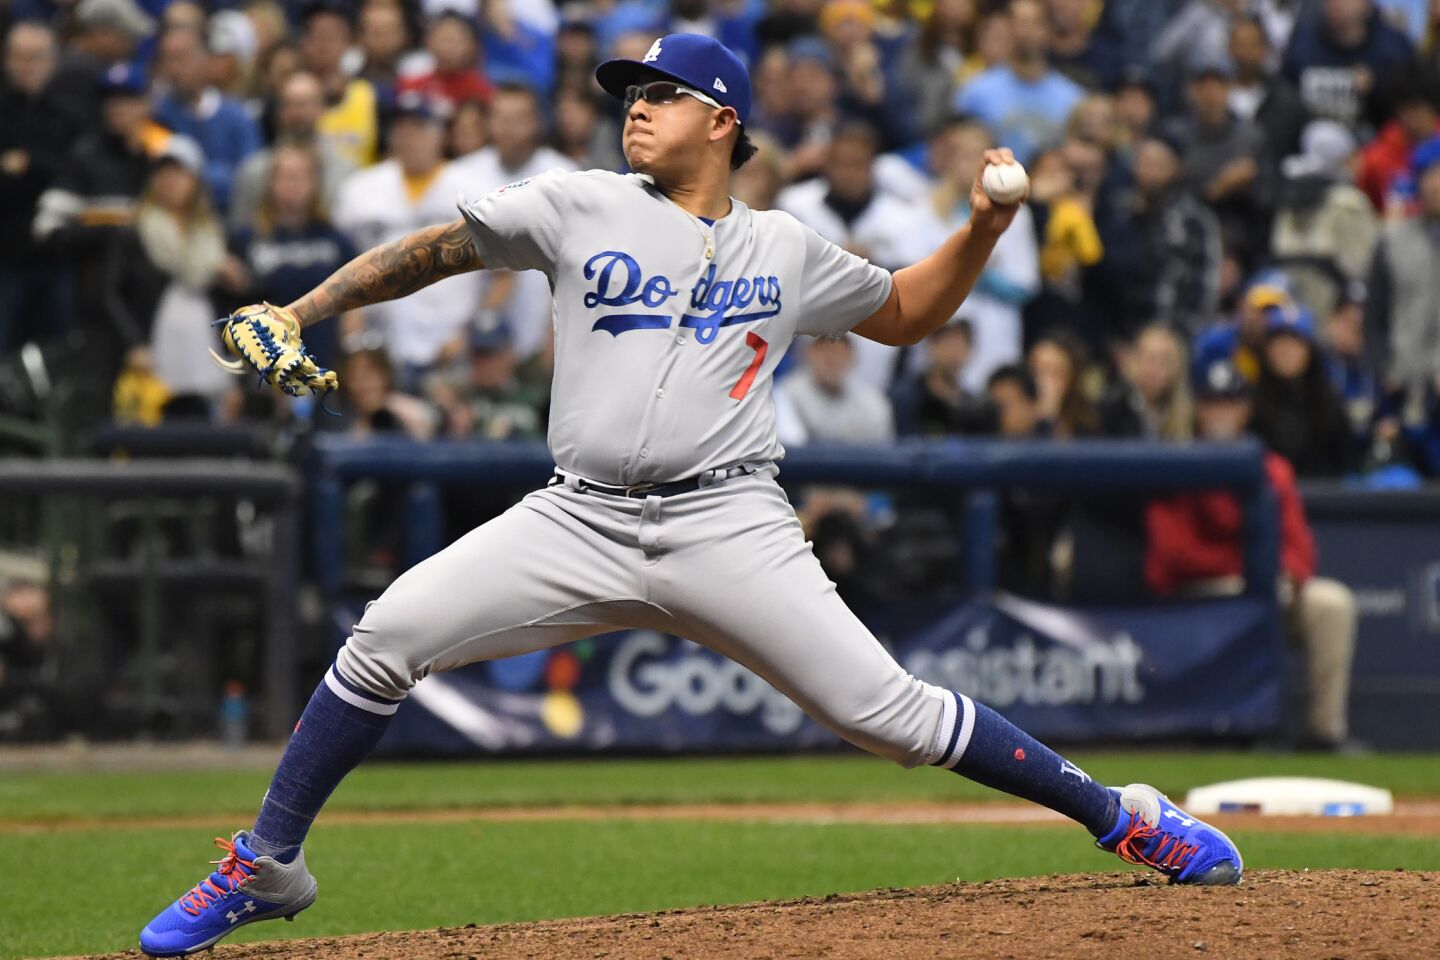 Dodgers relief pitcher Juan Urias throws in the fifth inning.